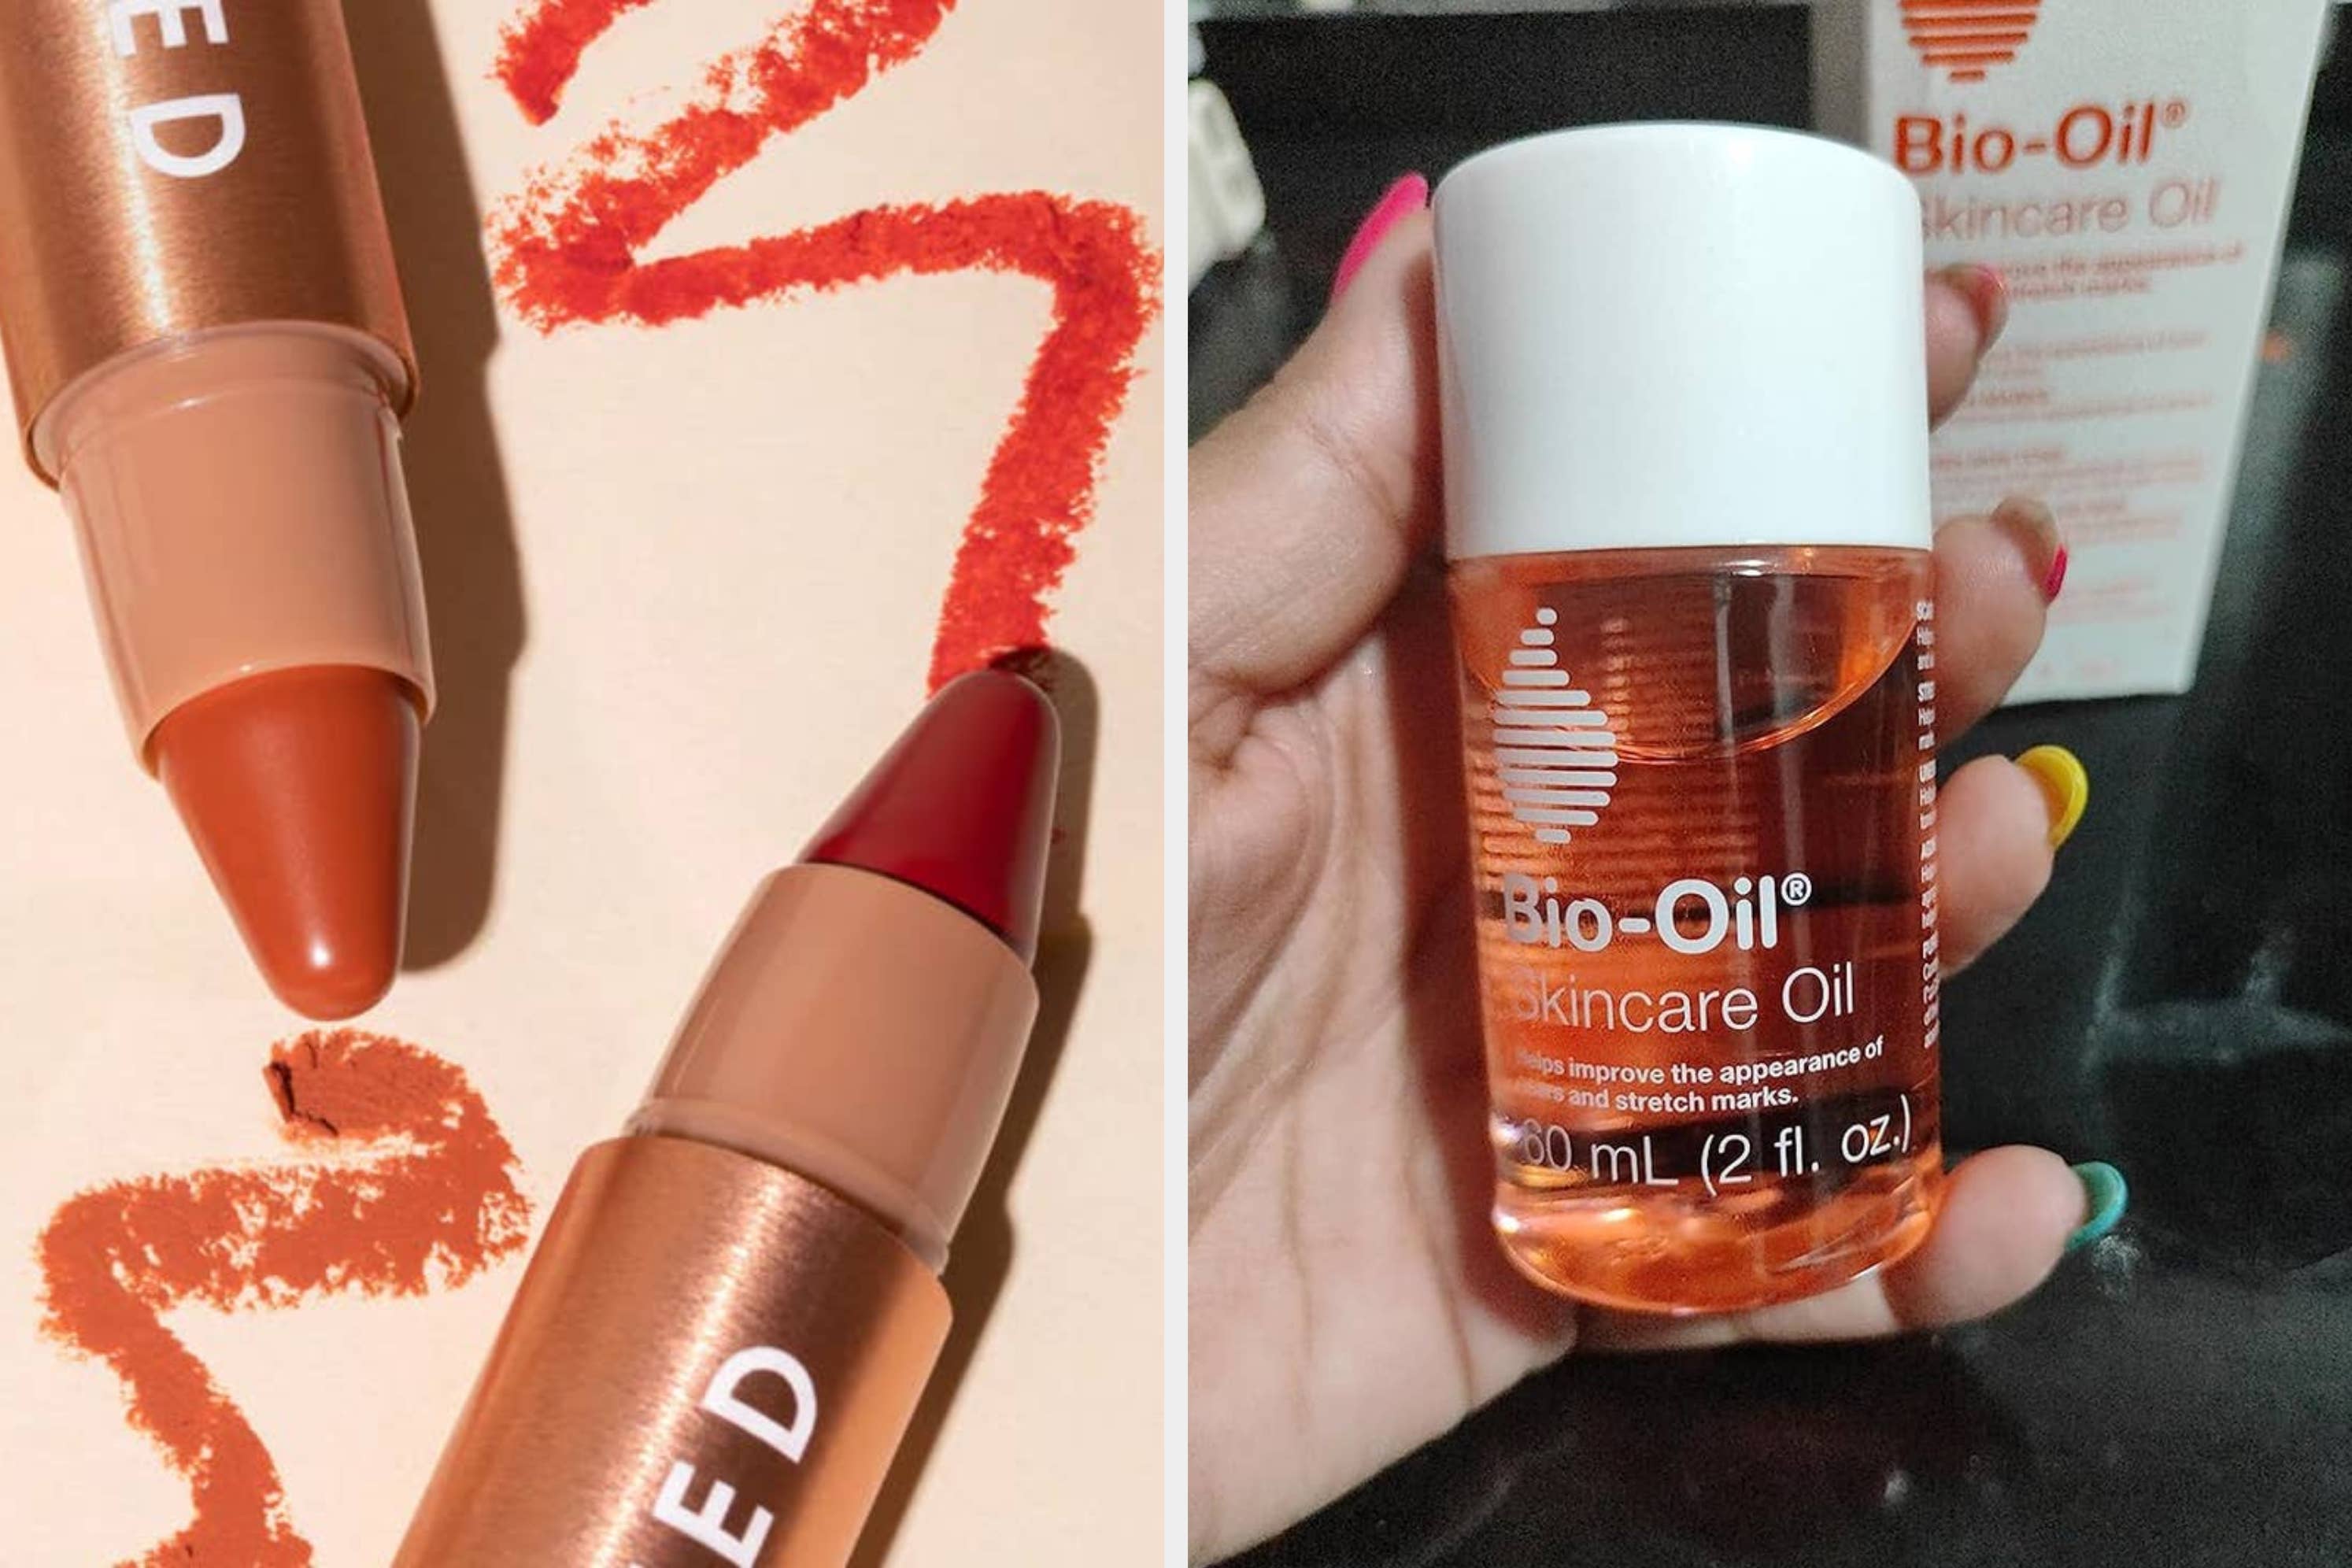 Makeup products on the left, including nude and red multistick colors and reviewer holding 2-oz bottle of bio-oil skincare oil